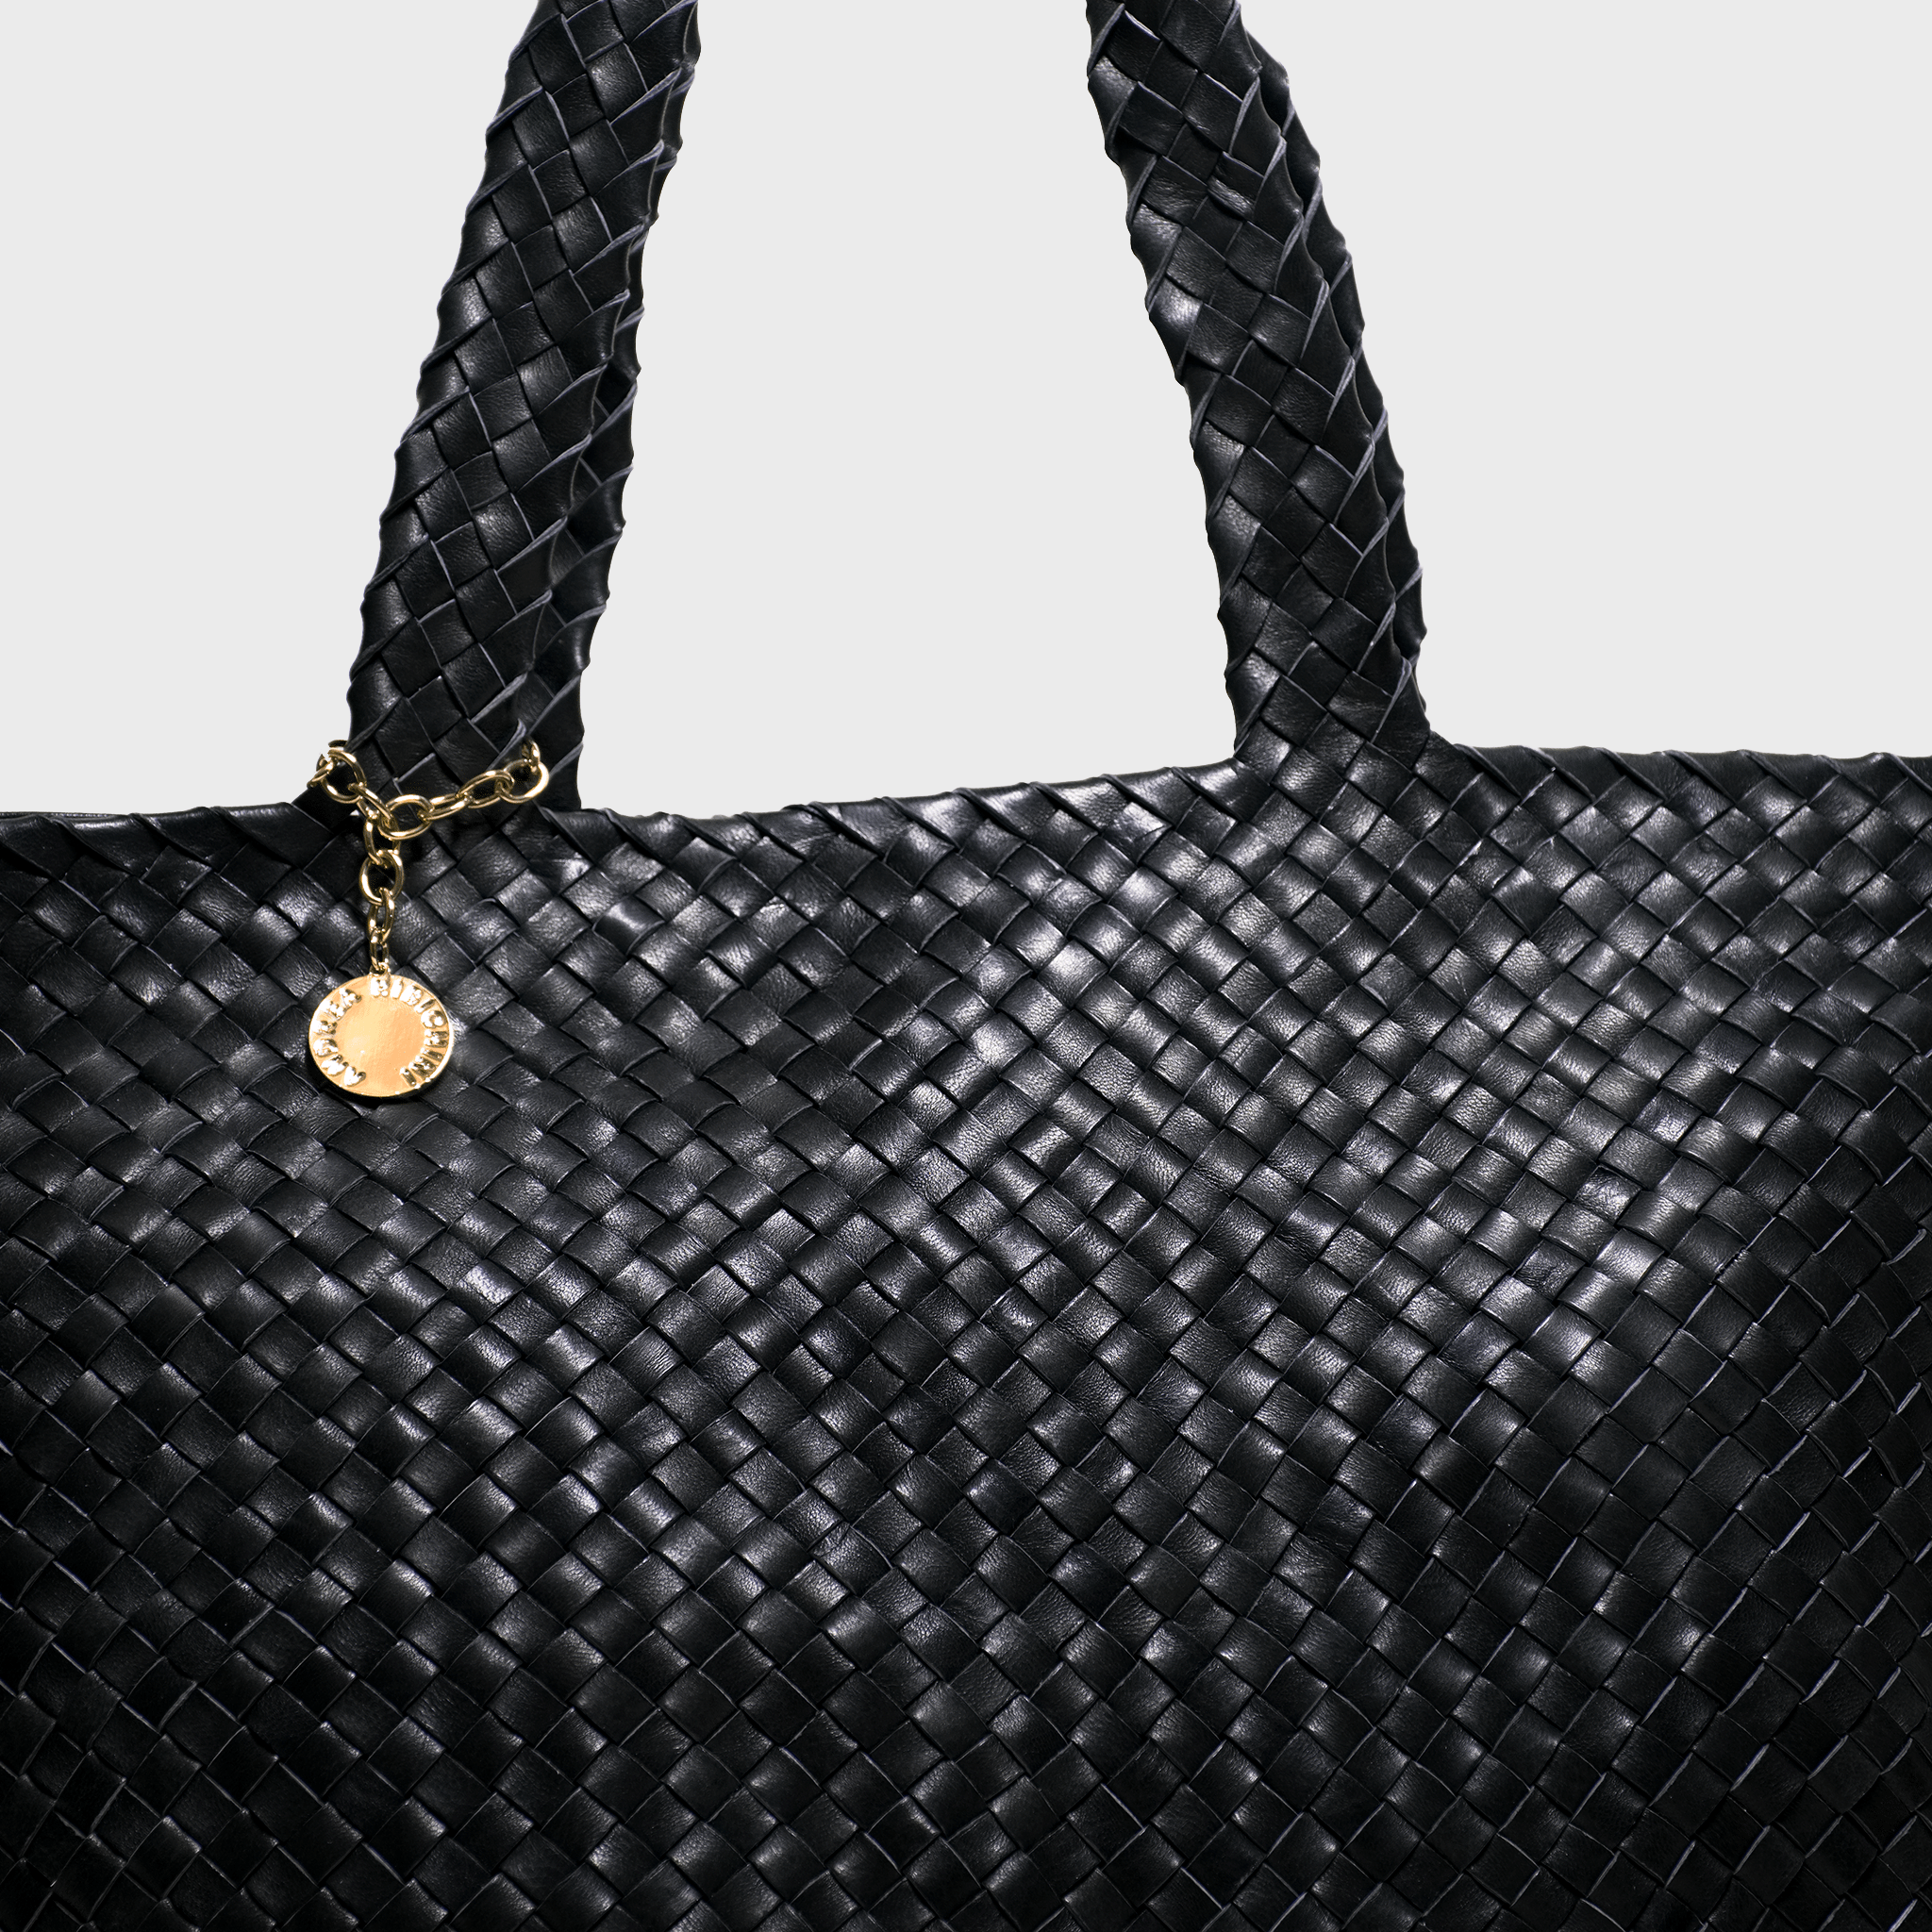 Luxury Woven Leather Bags From Italy - Attavanti